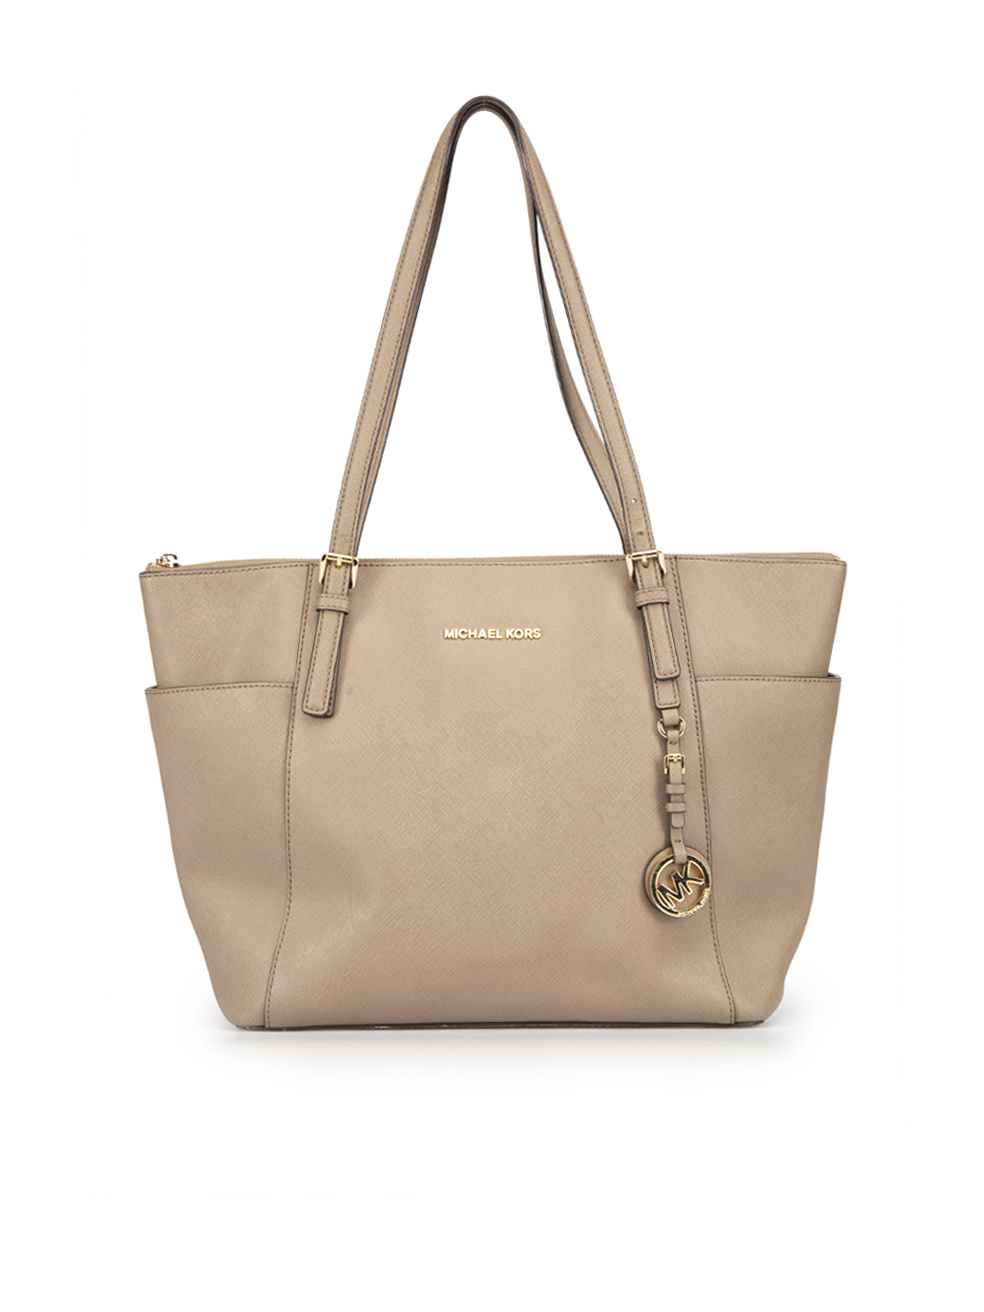 Find more Authentic Brown Michael Kors Speedy Bag for sale at up to 90% off